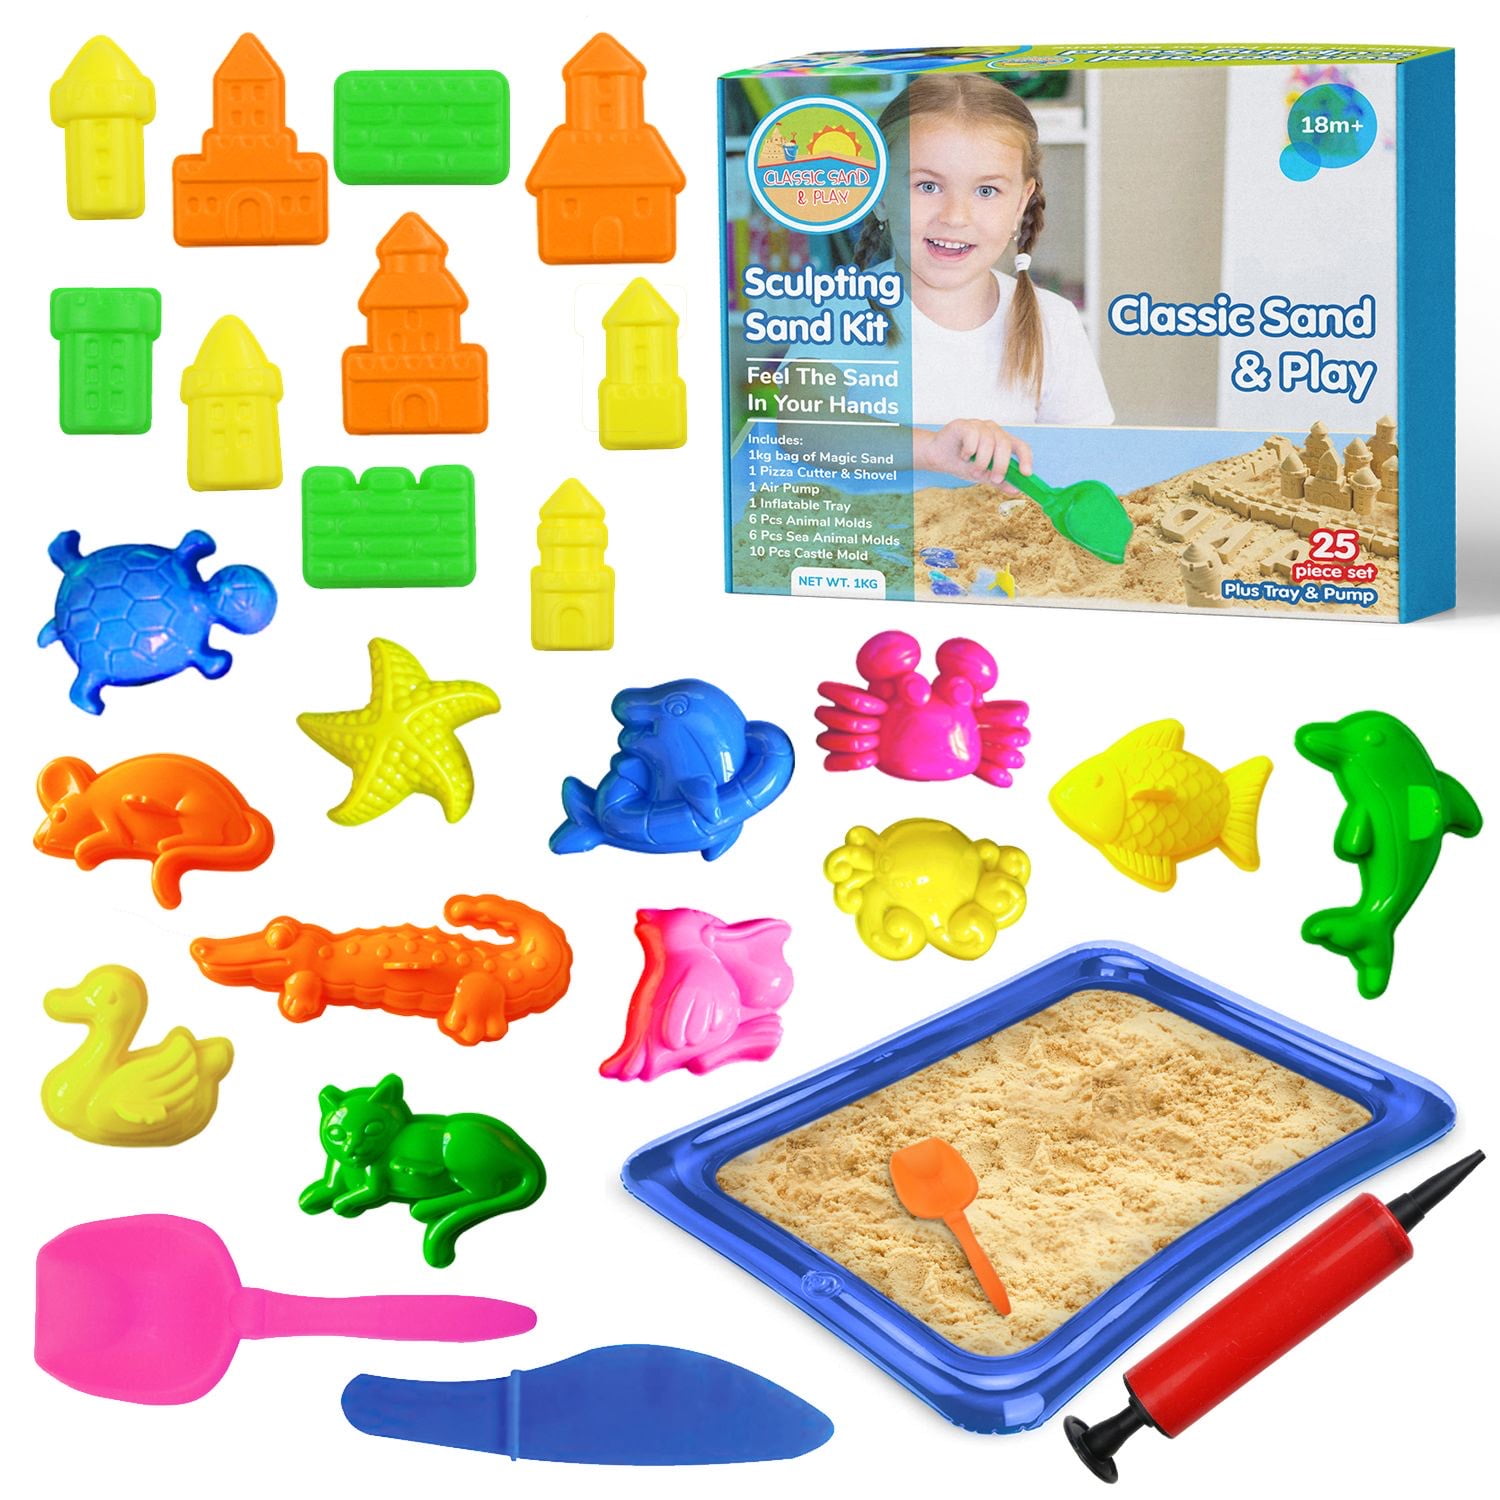 Sand Play Starter Set with Inflatable Tray & 5.5 lb Kinetic Sand